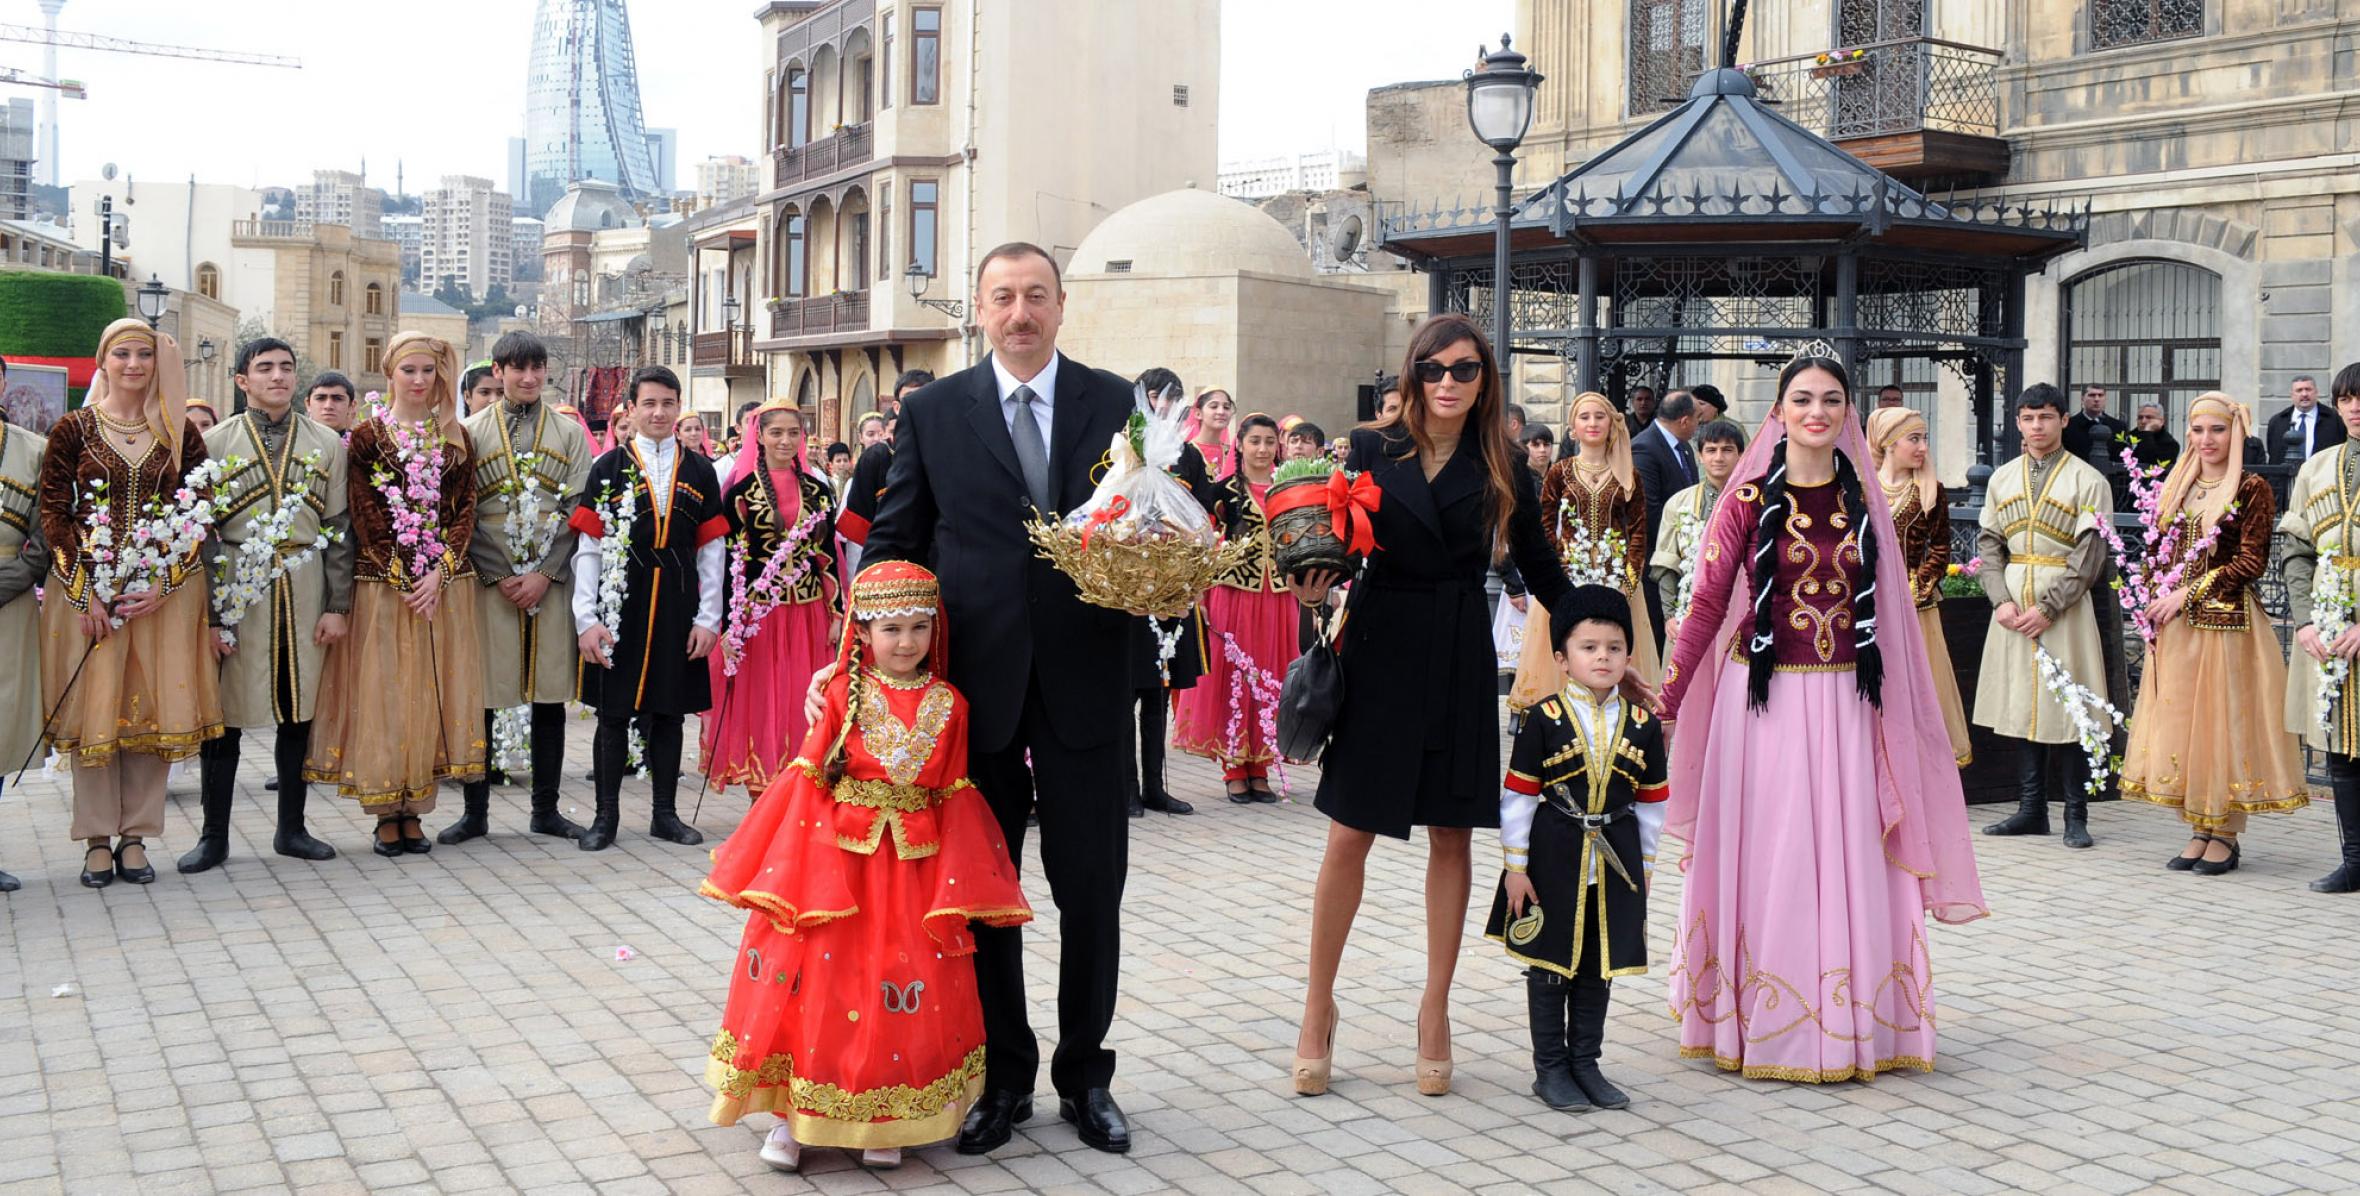 Ilham Aliyev took part in nationwide festivities on the occasion of Novruz holiday